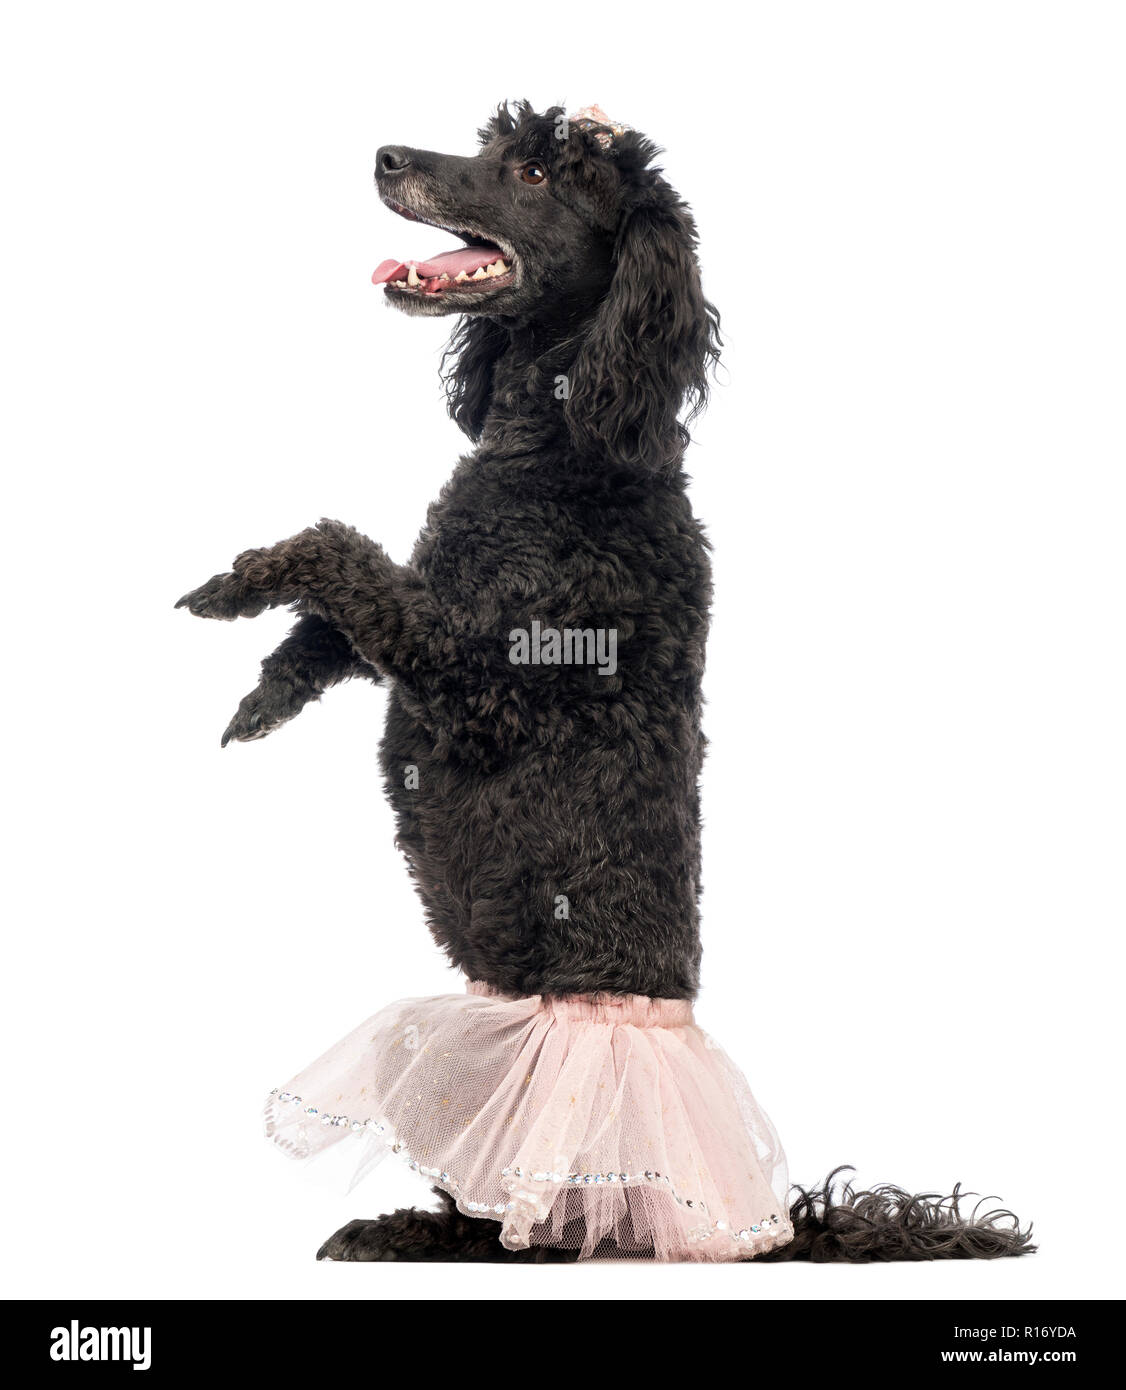 Poodle, 5 years old, standing on hind legs, wearing a pink tutu and looking up in front of white background Stock Photo